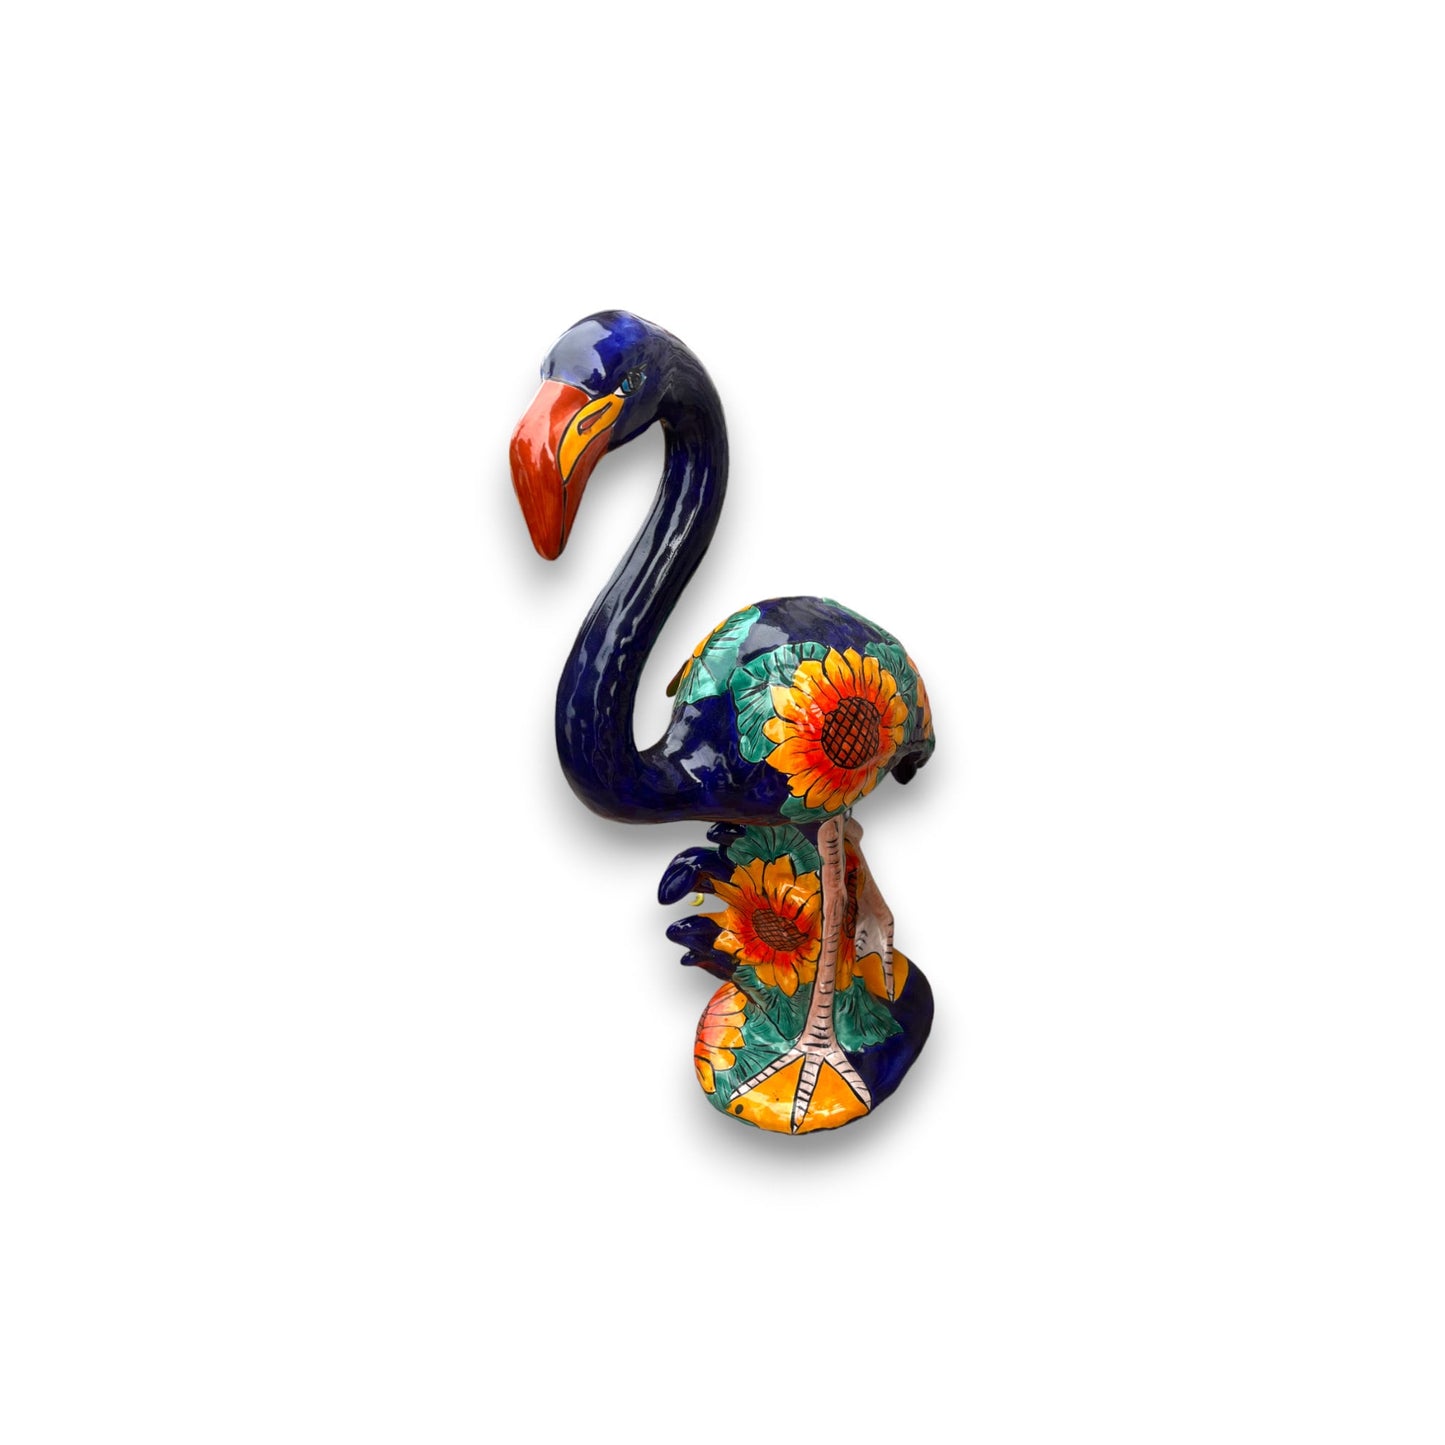 Large Talavera Flamingo Statue | Colorful Hand-Painted Mexican Bird Pottery (2.5 Feet Tall)